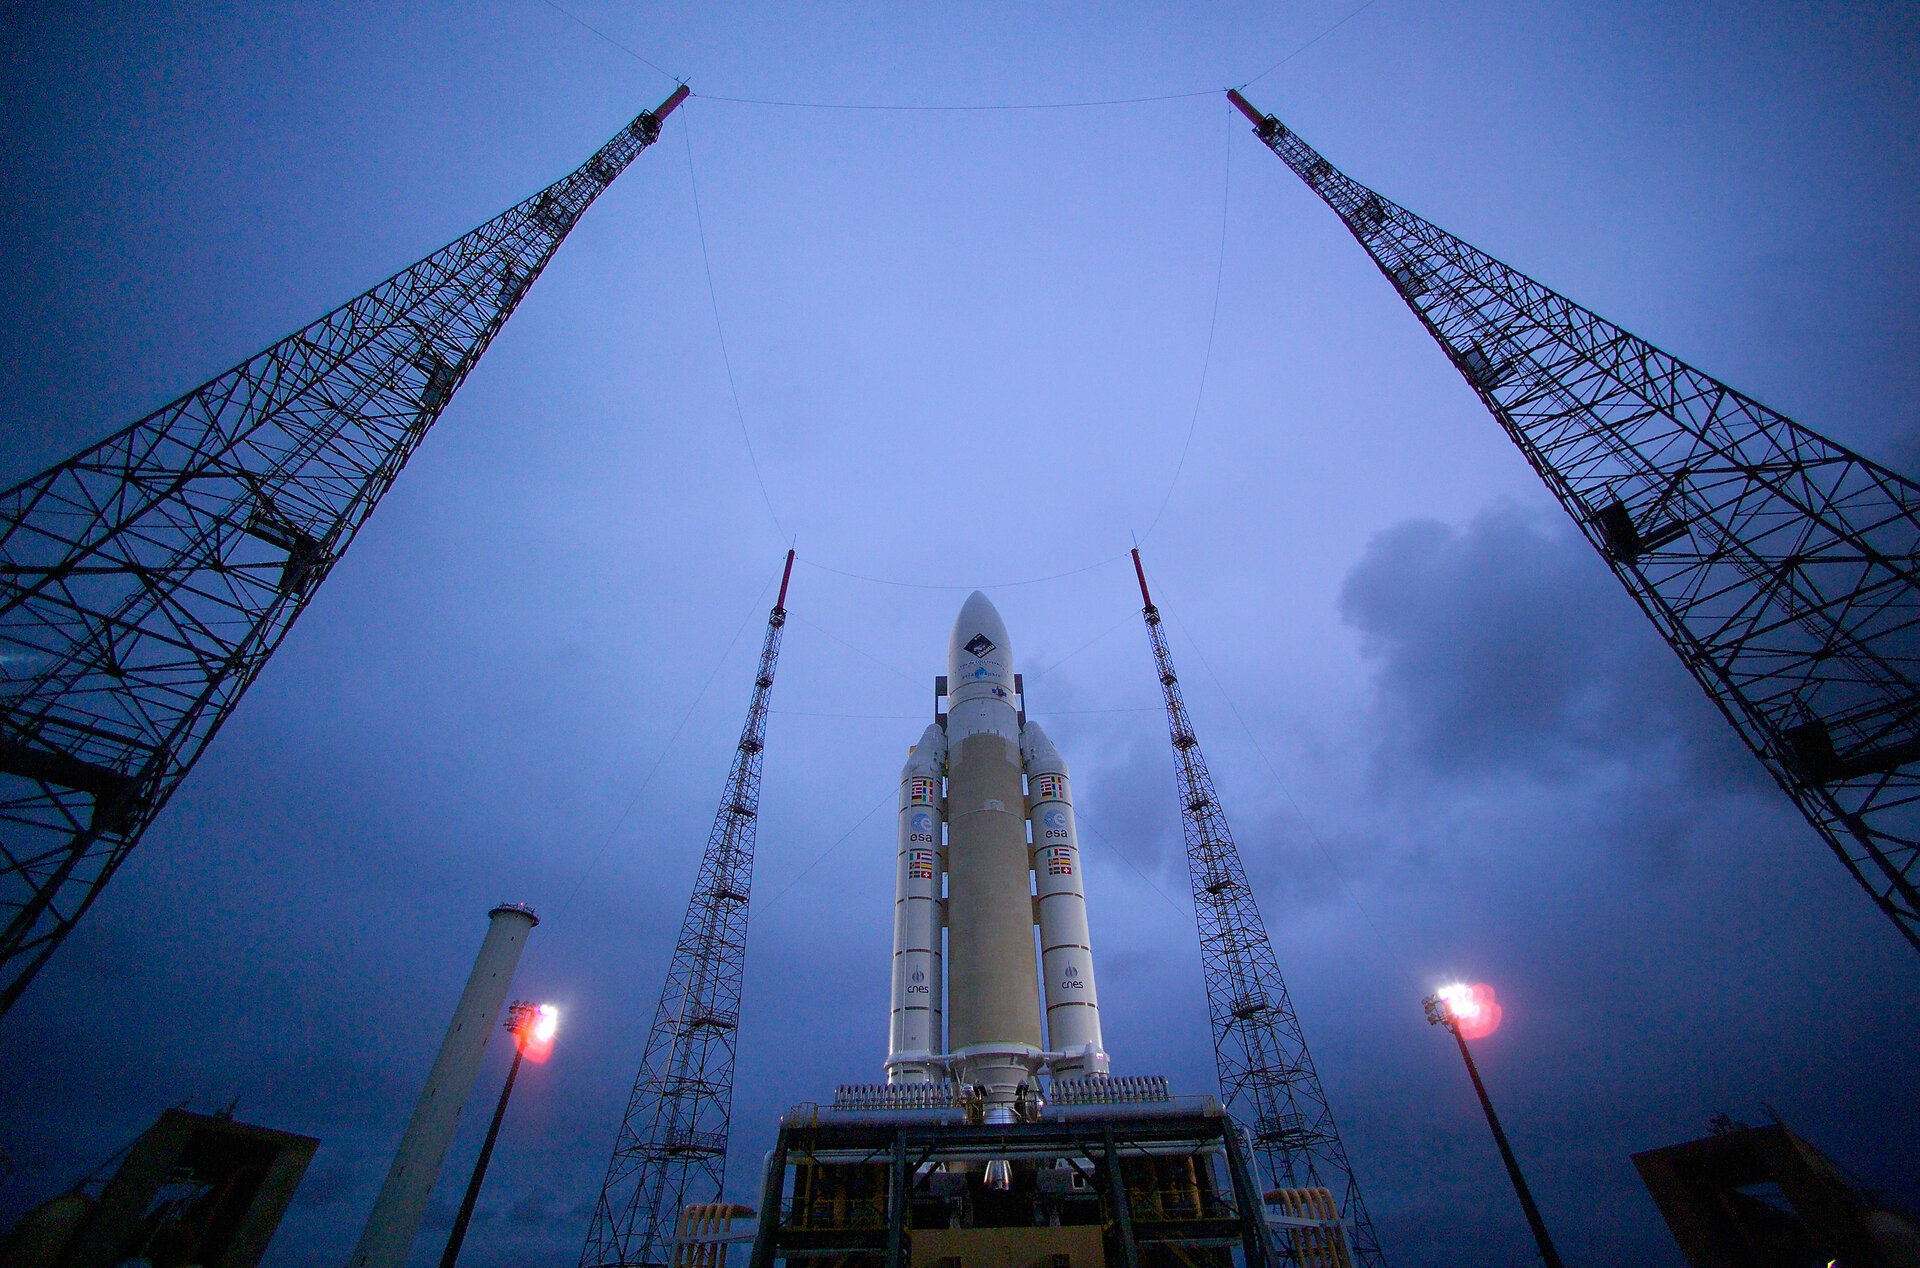 Ariane 5 stands on the pad at the ZL-3 